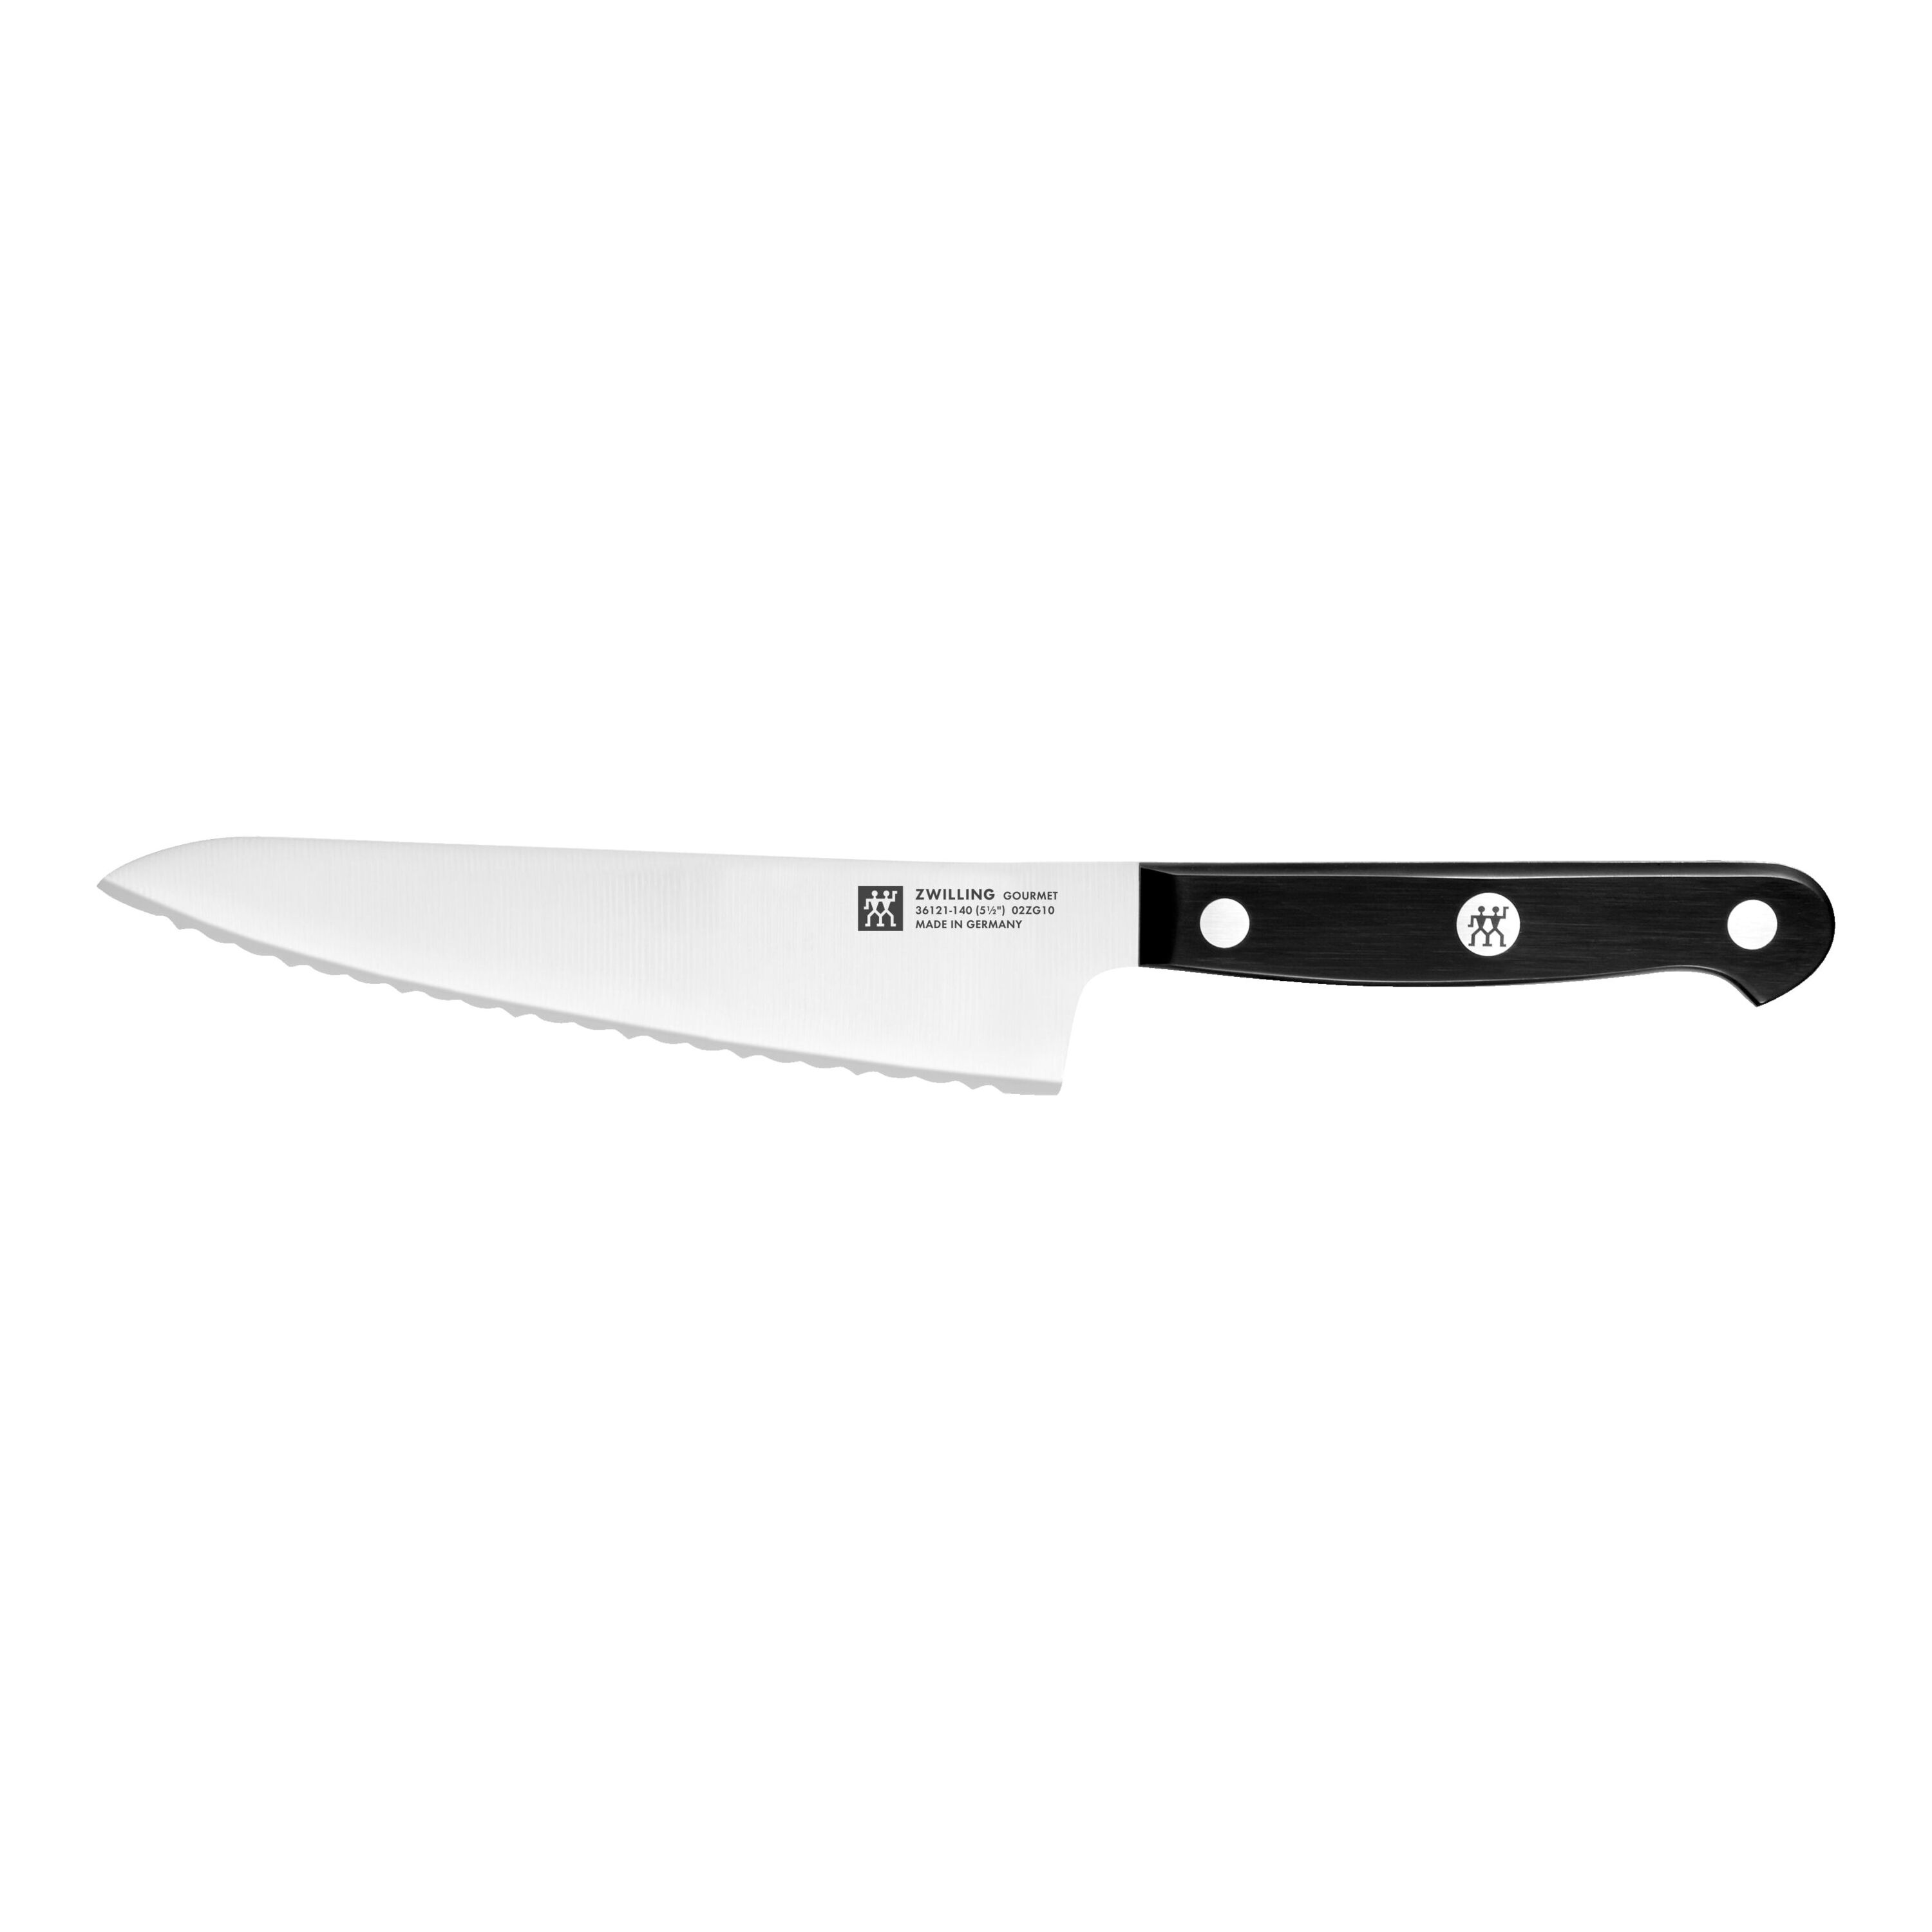  ZWILLING Gourmet 8-inch Chef's Knife, Kitchen Knife, Black,  Stainless Steel: Home & Kitchen